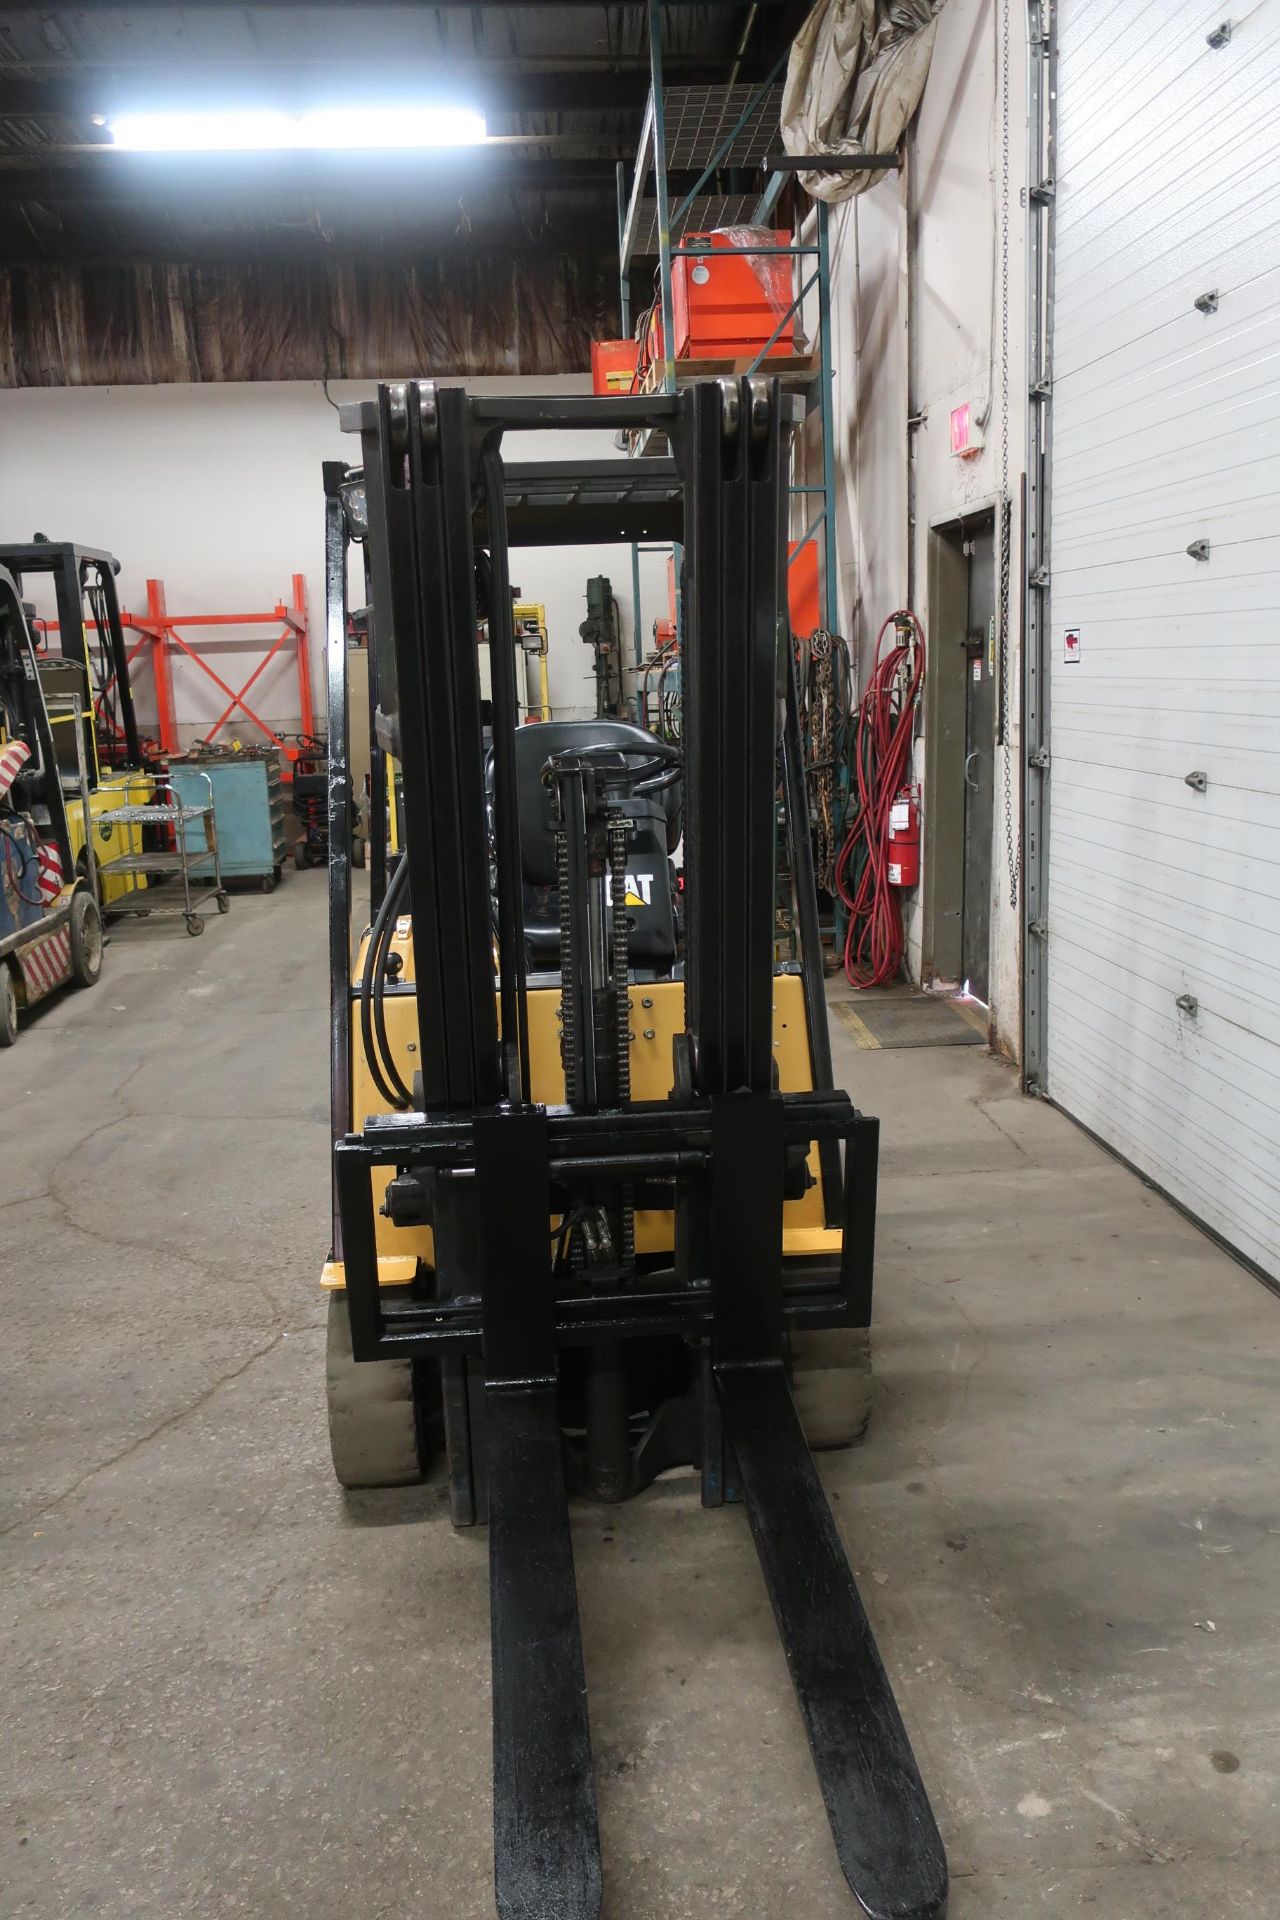 FREE CUSTOMS - CAT 3500lbs Forklift 3-Wheel unit with 3-stage Mast and Sideshift with LOW HOURS - Image 2 of 2